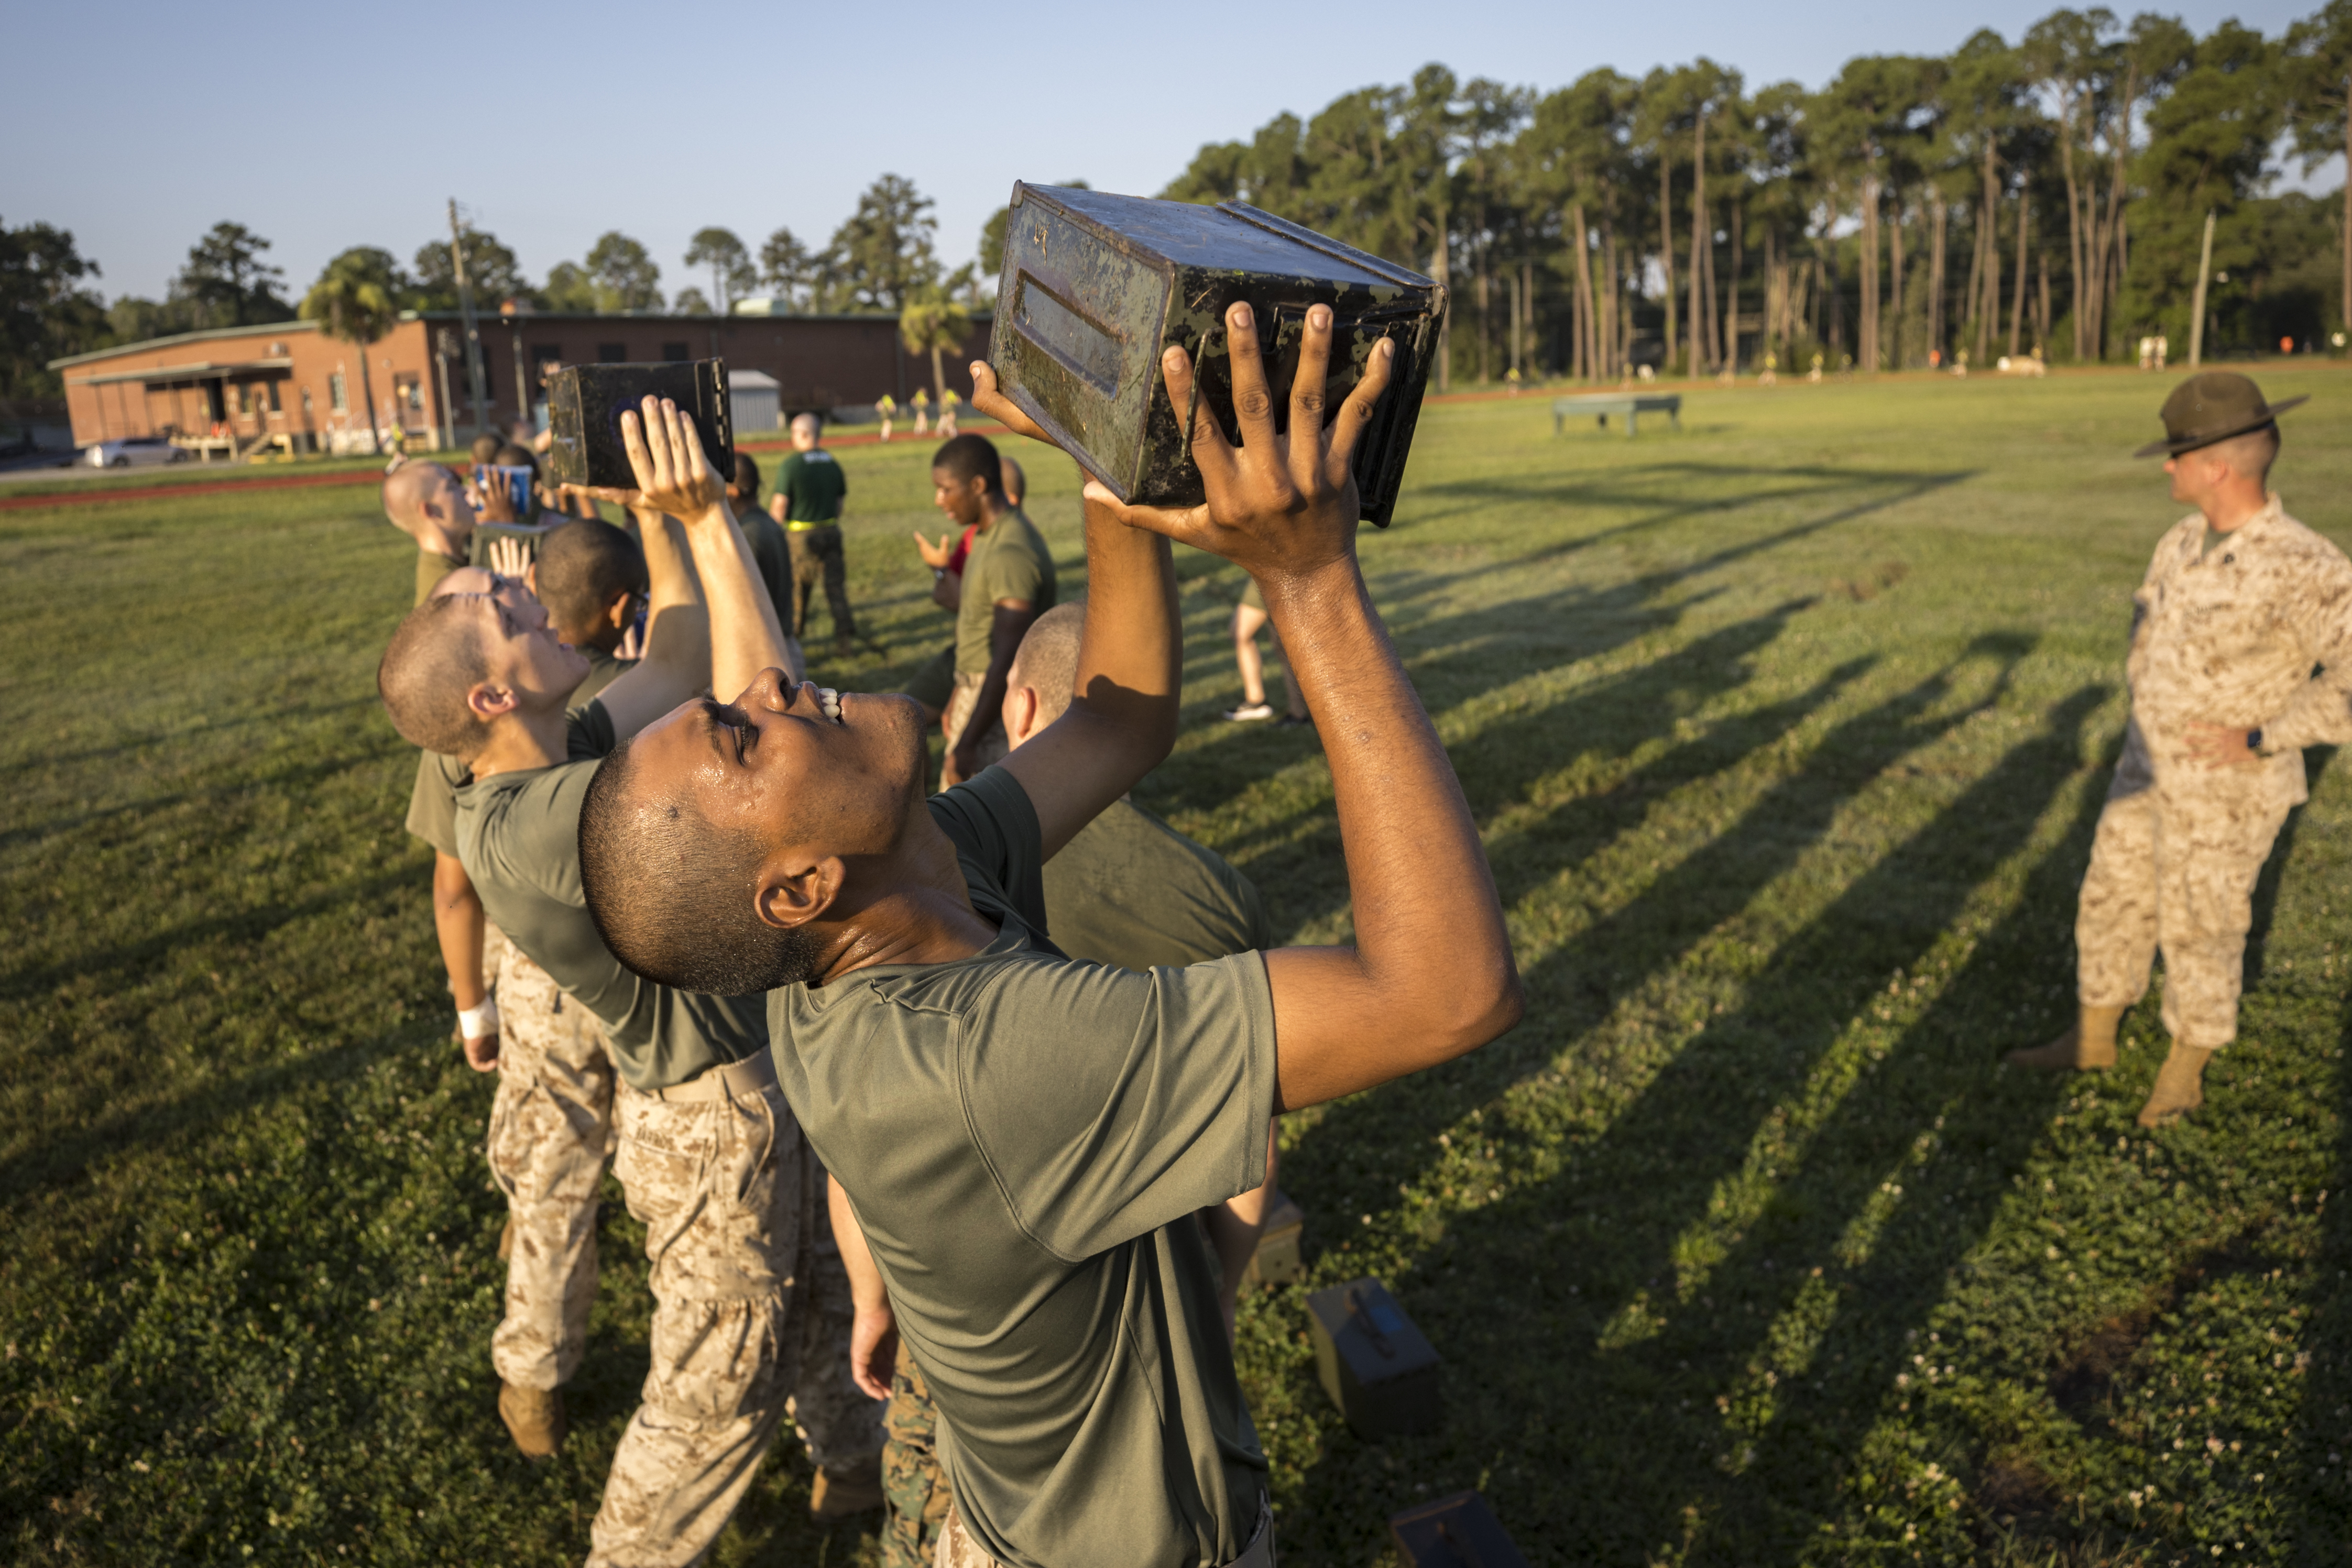 The Few, the Proud' aren't so few: Marines recruiting surges while